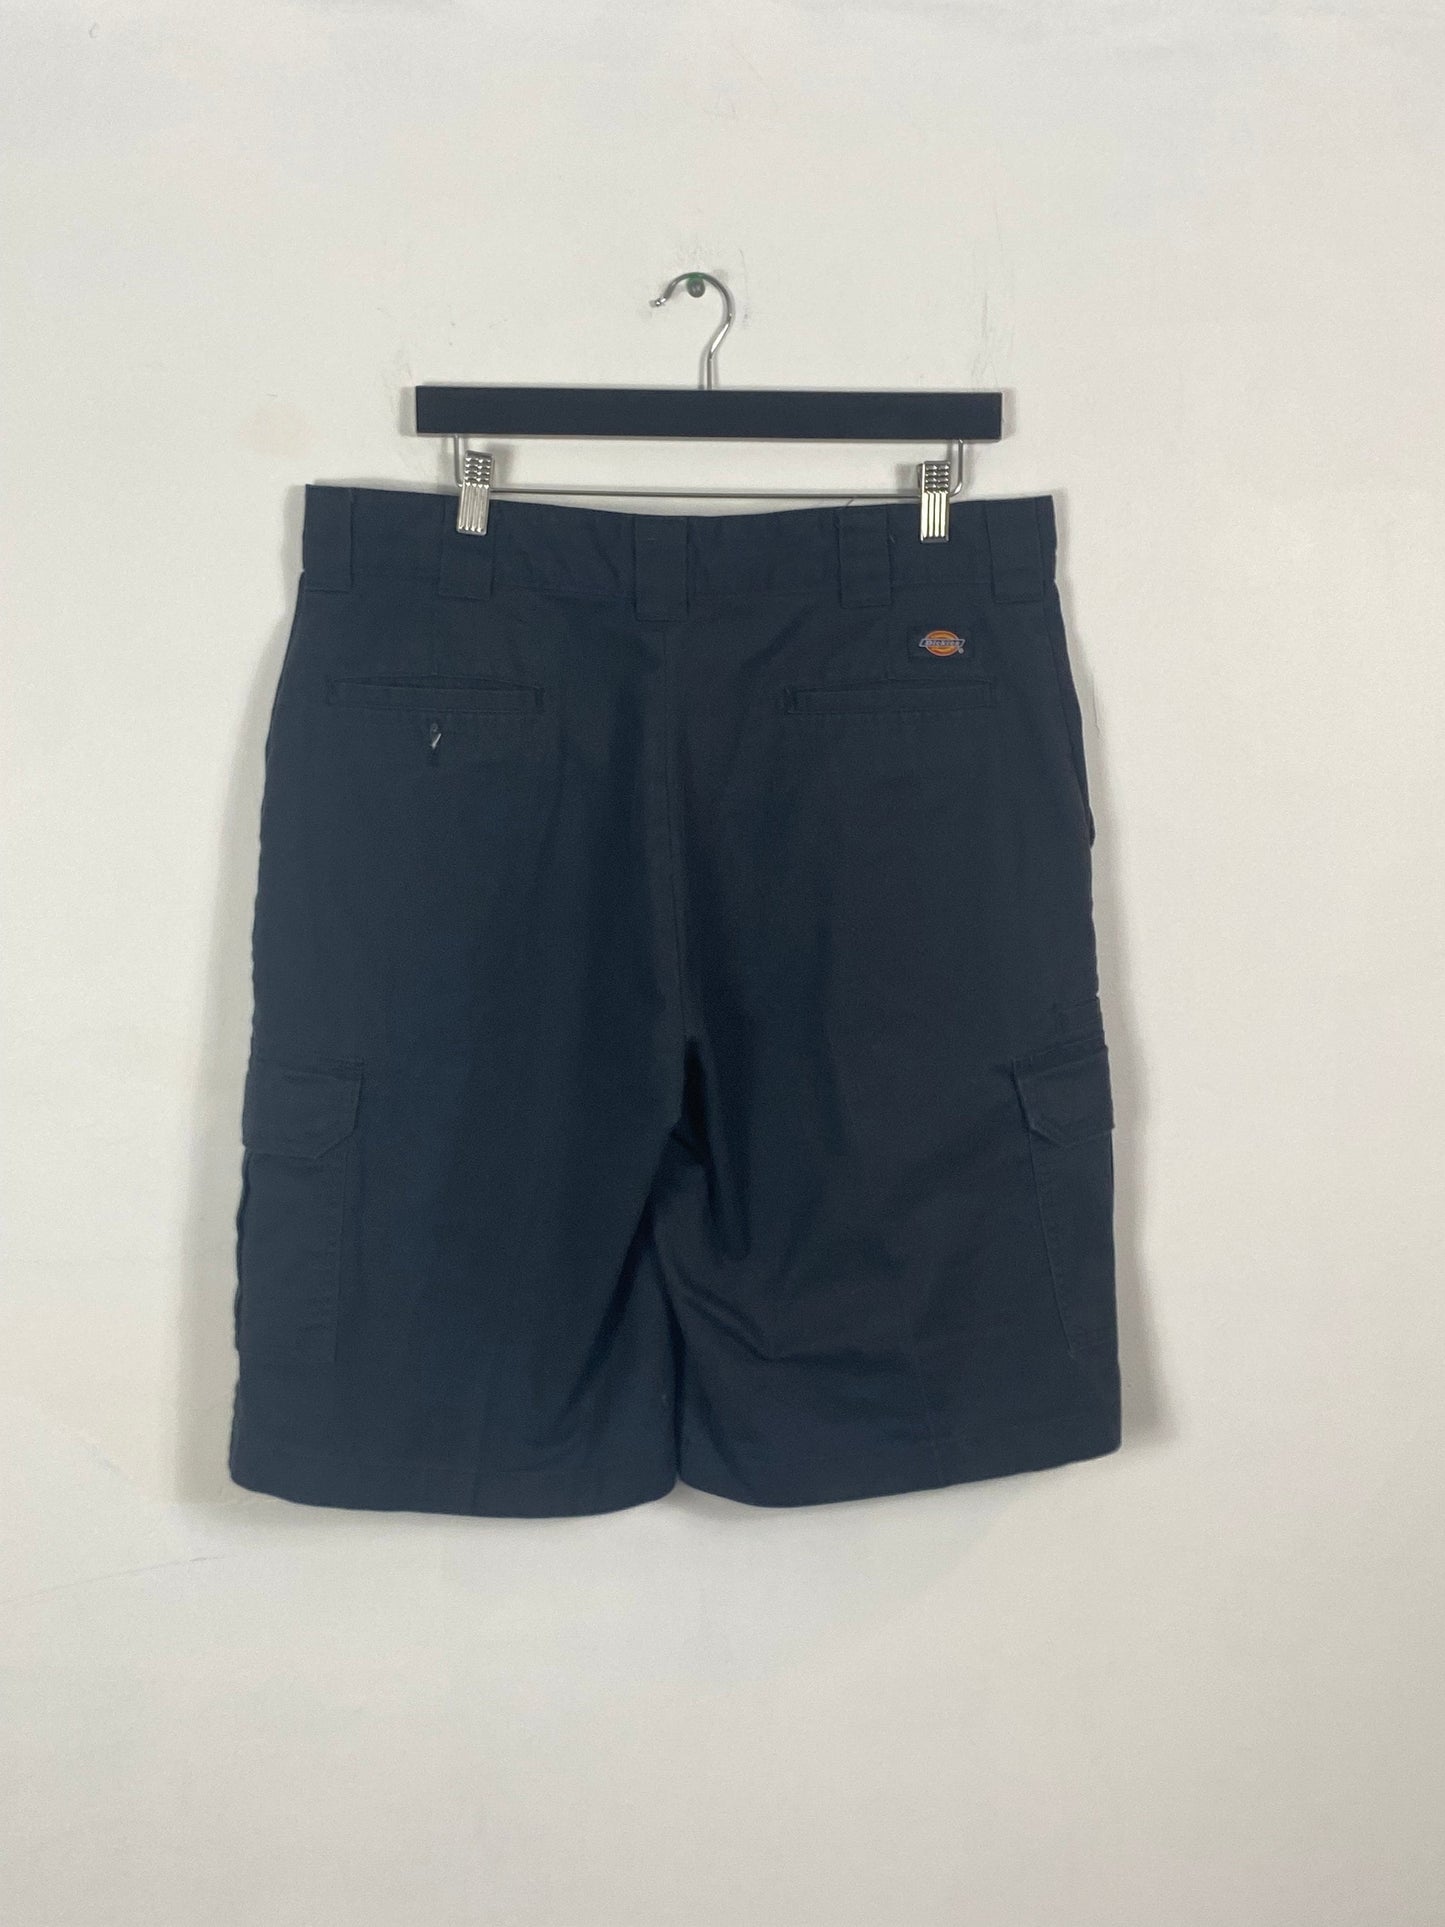 Dickies Shorts / 90s Vintage Canvas Cargo Trunks / Streetwear / Hip Hop Clothing / Size 36